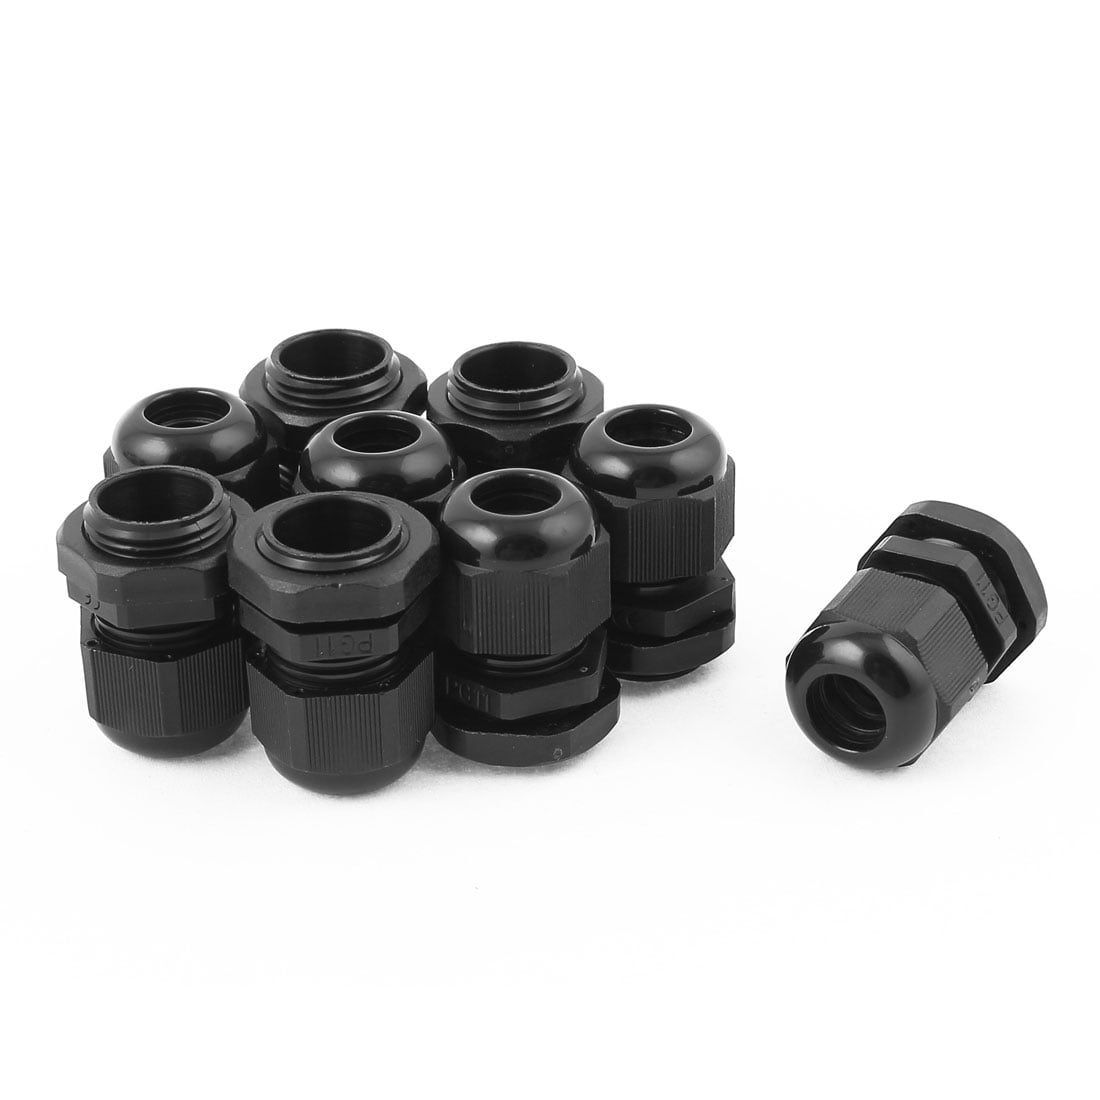 5PCS Black Spiral Cable Gland PG13.5 Cable Range 6-12MM Nylon IP68 Waterproof 